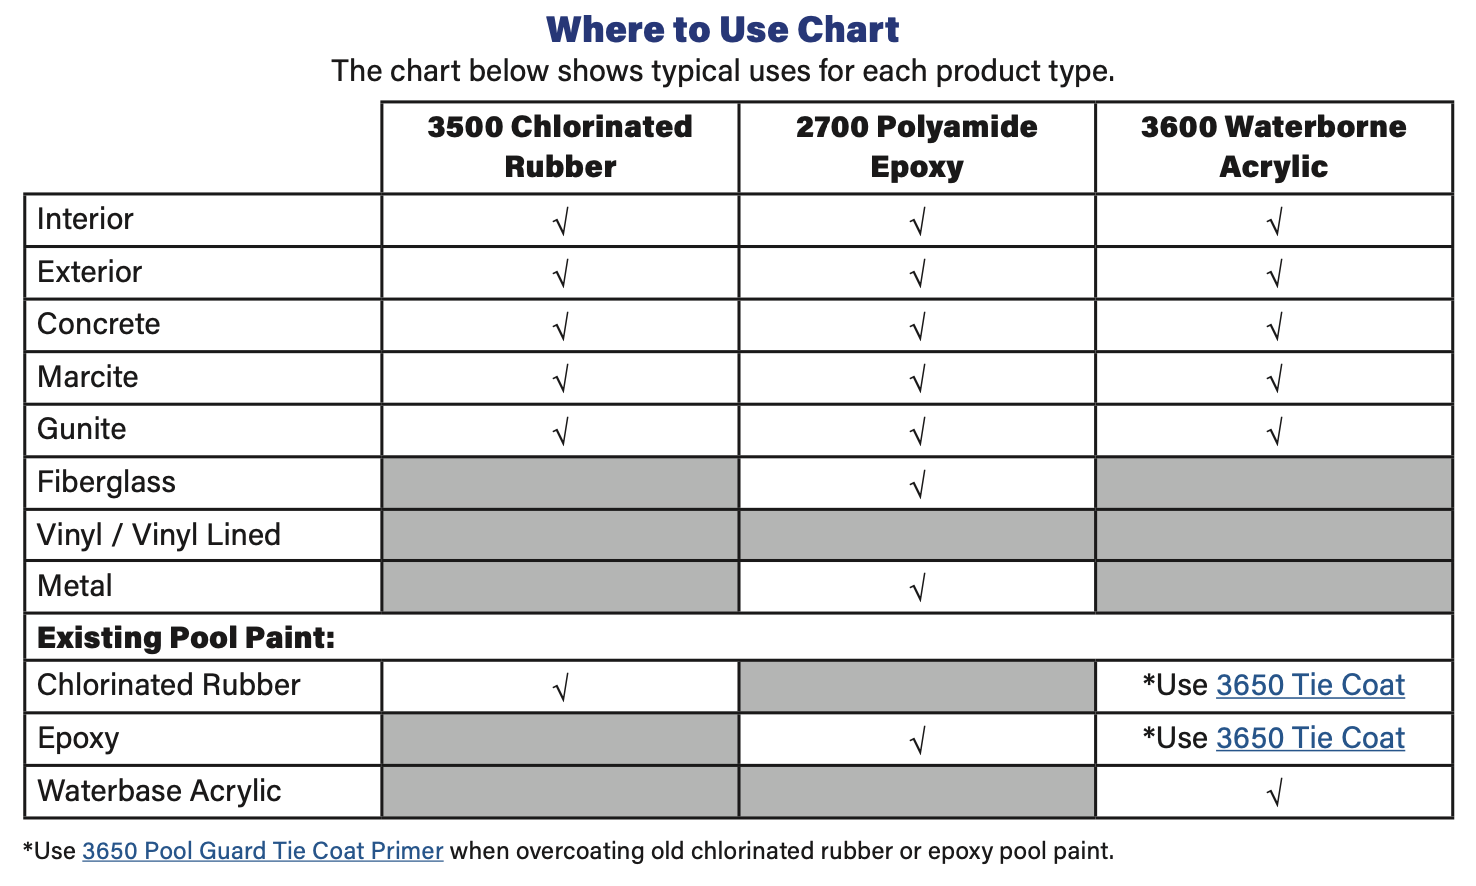 Where to Use Chart